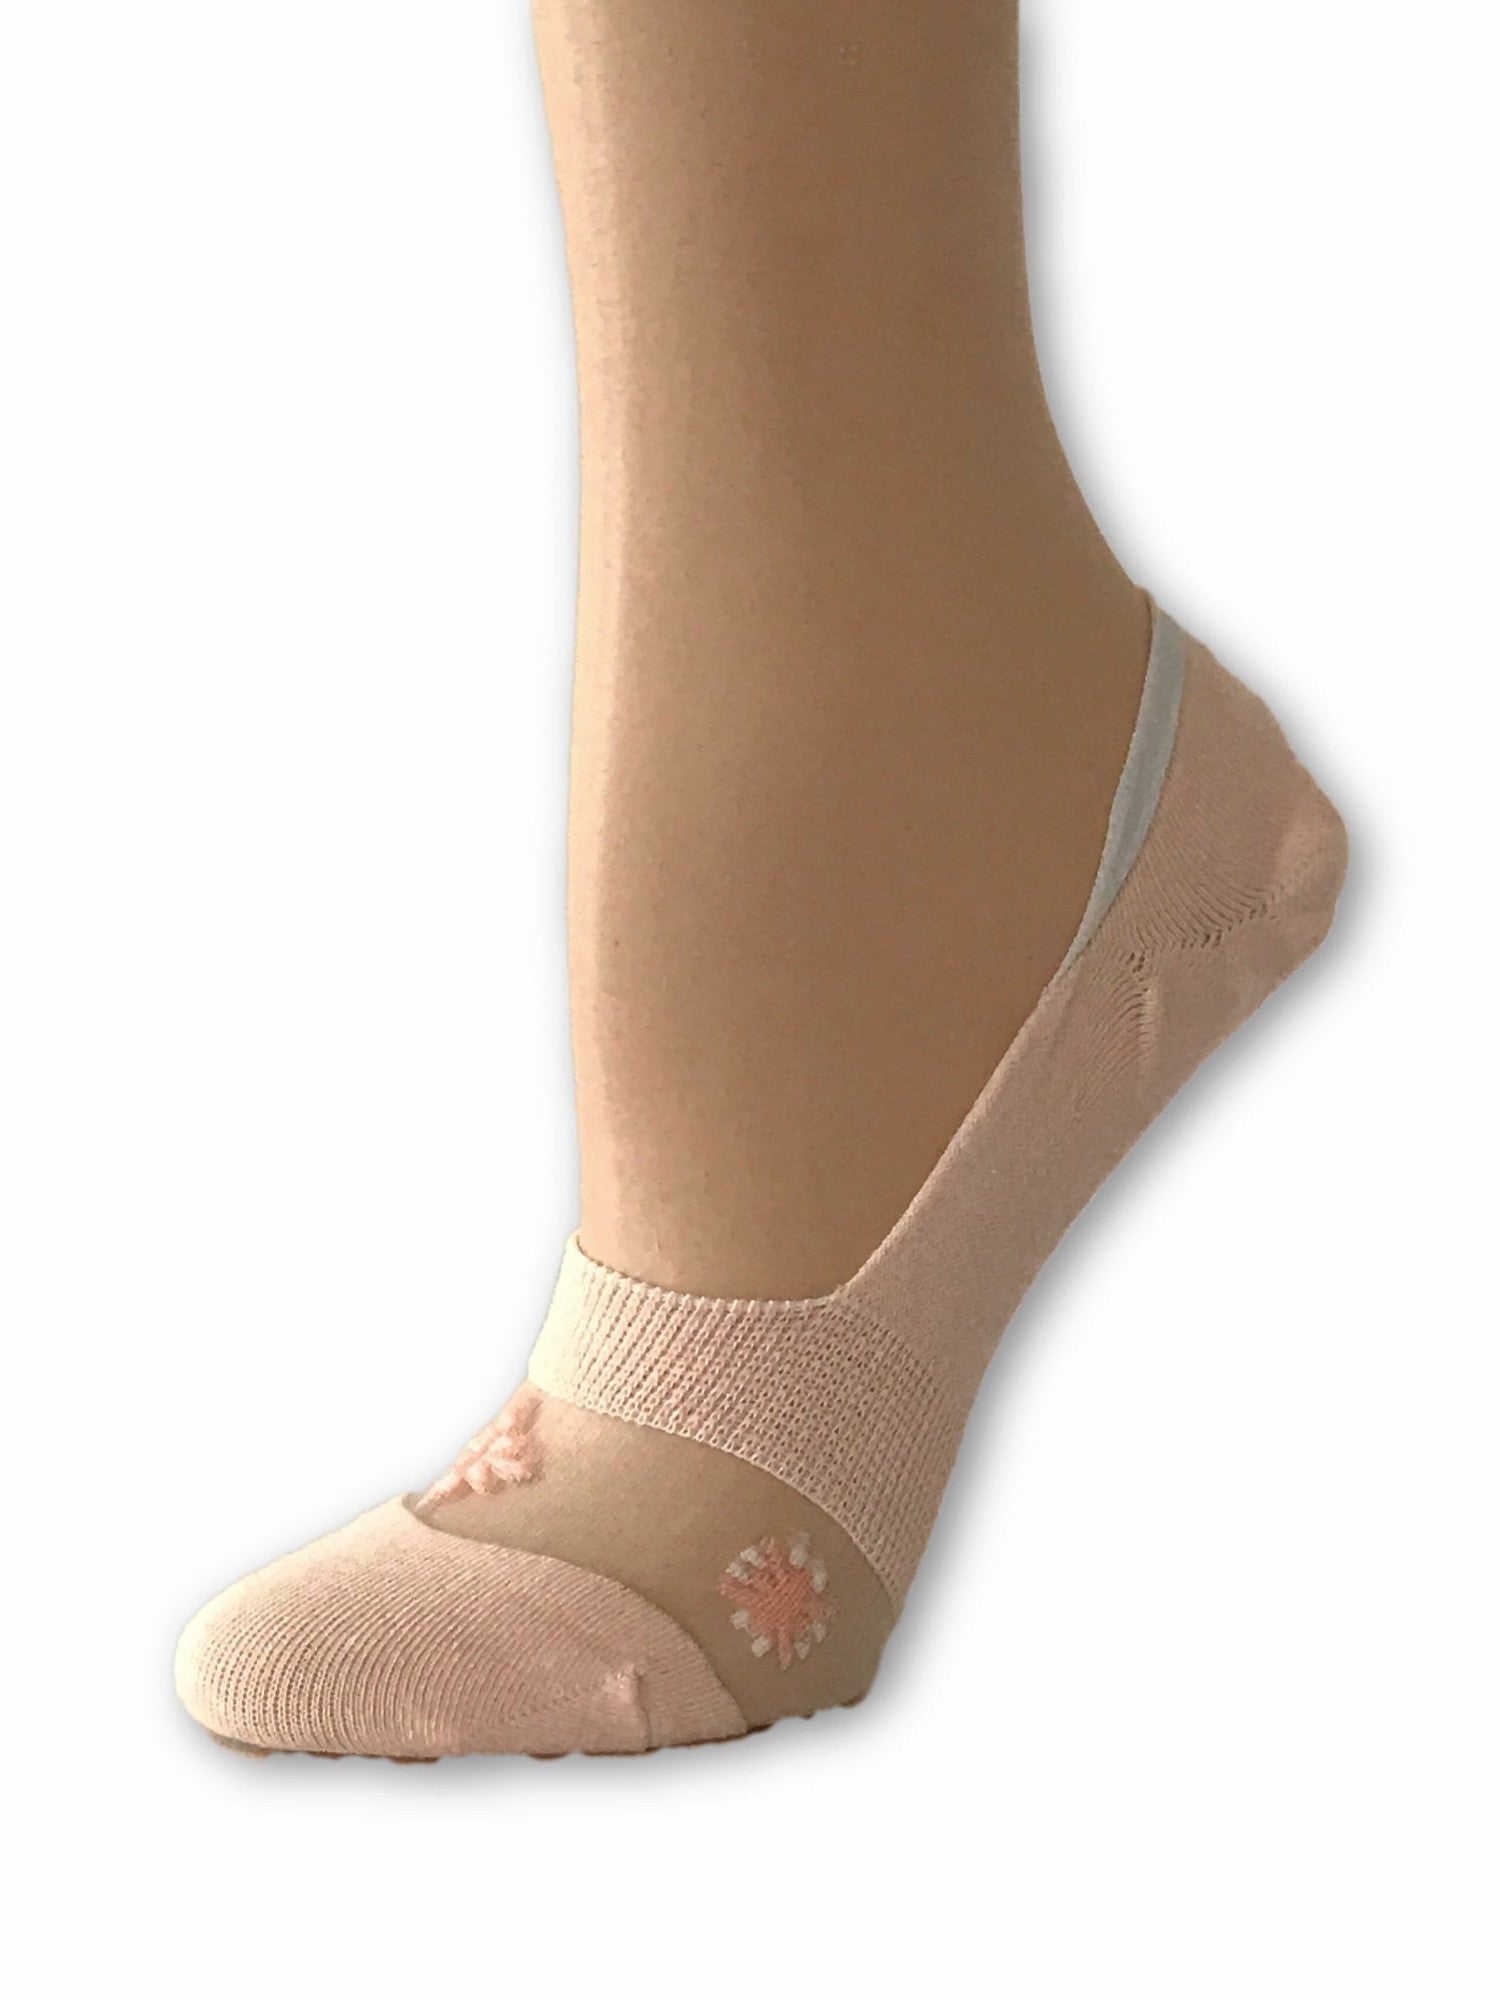 One-Stripped Baby Pink Ankle Sheer Socks - Global Trendz Fashion®